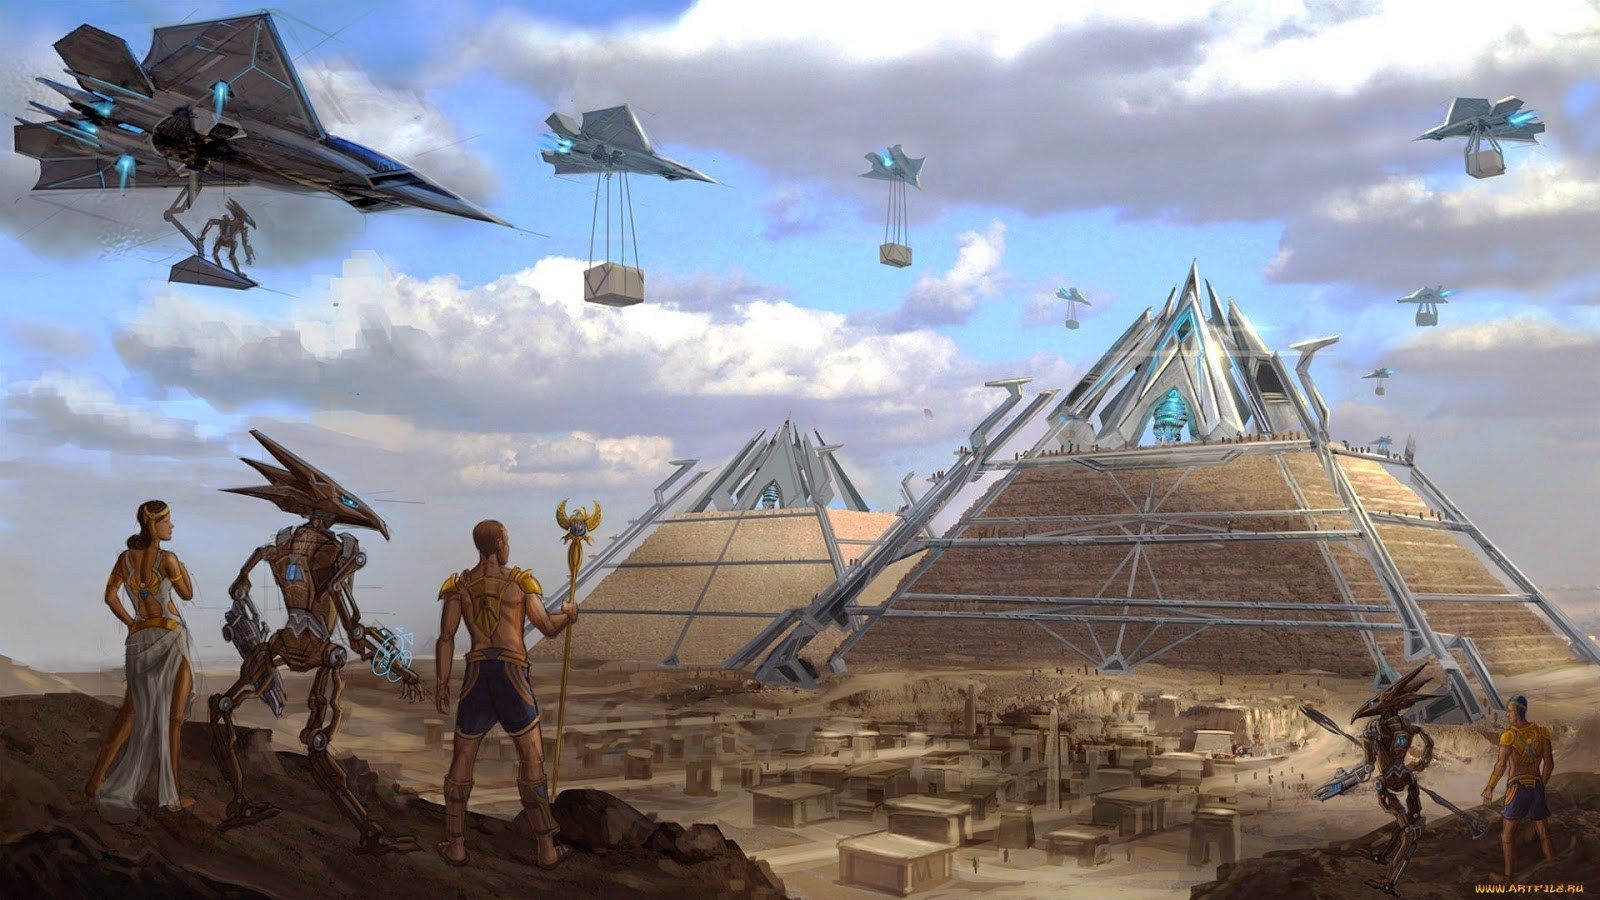 Extraordinary Documentary Tells Us How Ancient Aliens Helped Build